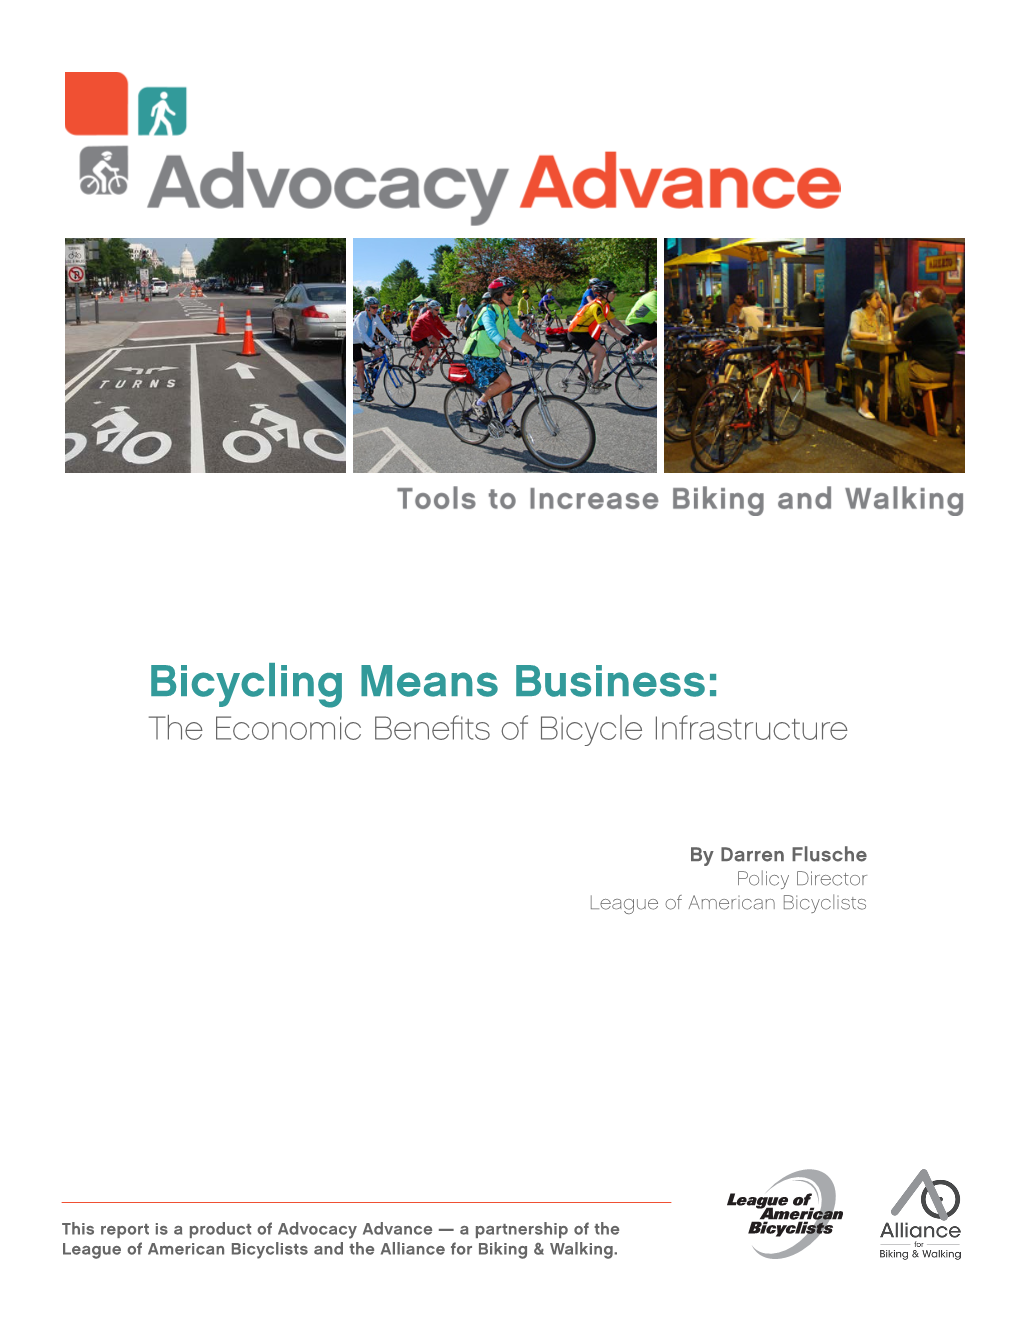 Bicycling Means Business: the Economic Benefits of Bicycle Infrastructure